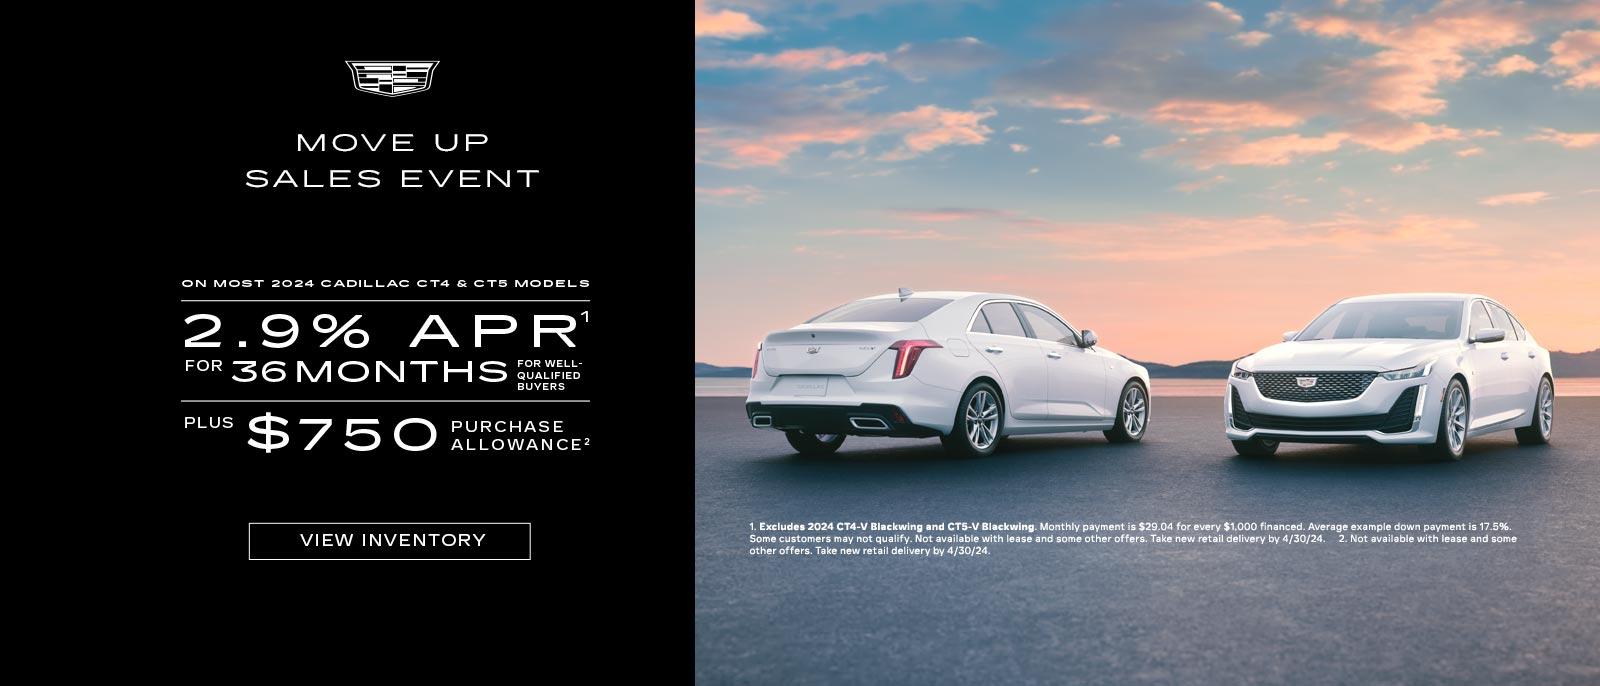 ON Most 2024 Cadillac CT4 and CT5 models. 2.9% APR for 36 months for well qualified buyers. Plus $750 Purchase Allowance.